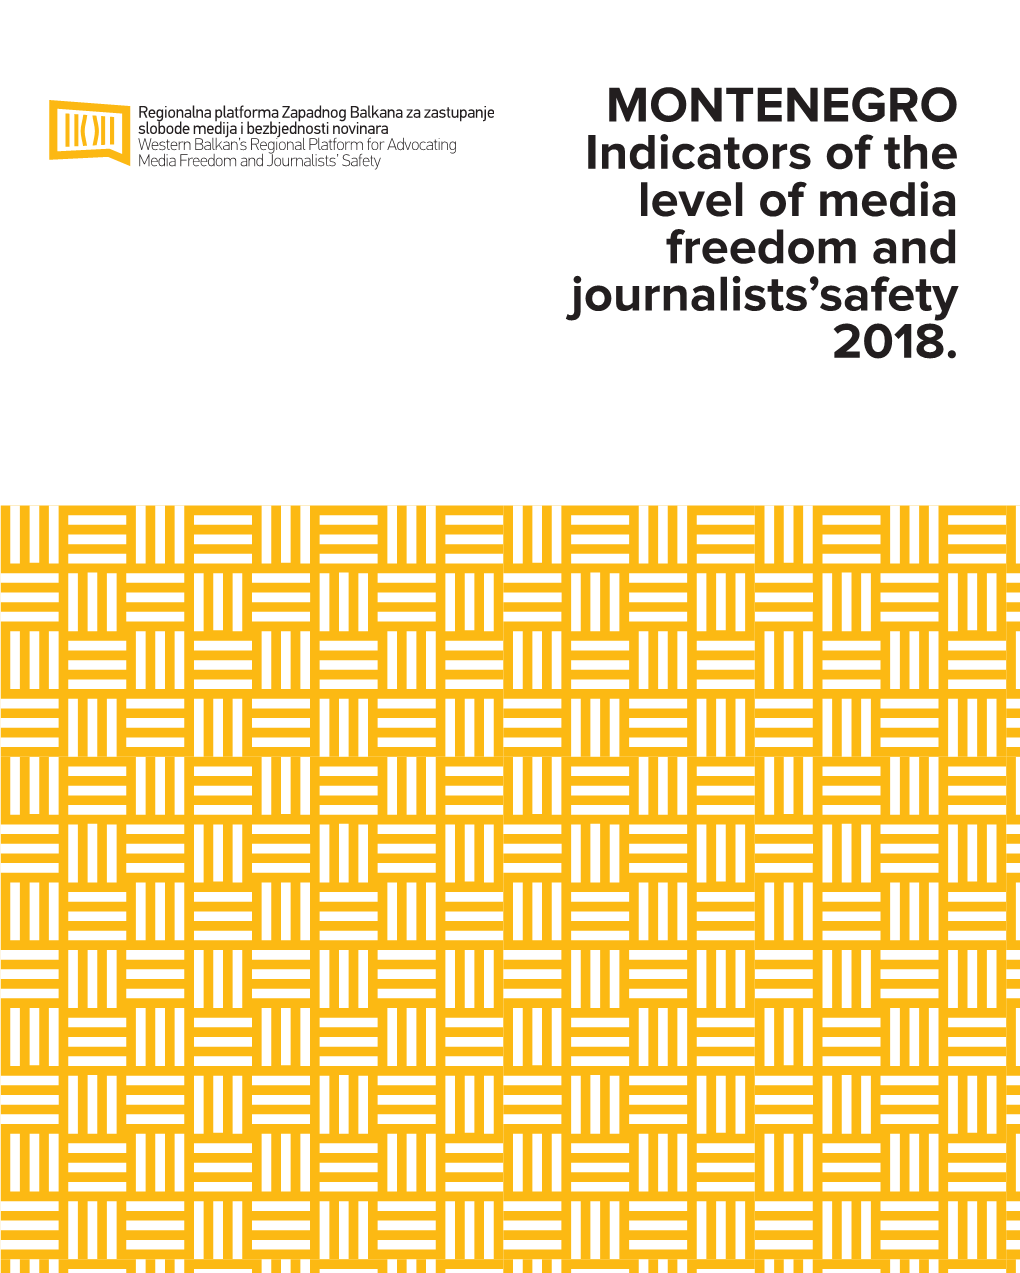 MONTENEGRO Indicators of the Level of Media Freedom and Journalists'safety 2018